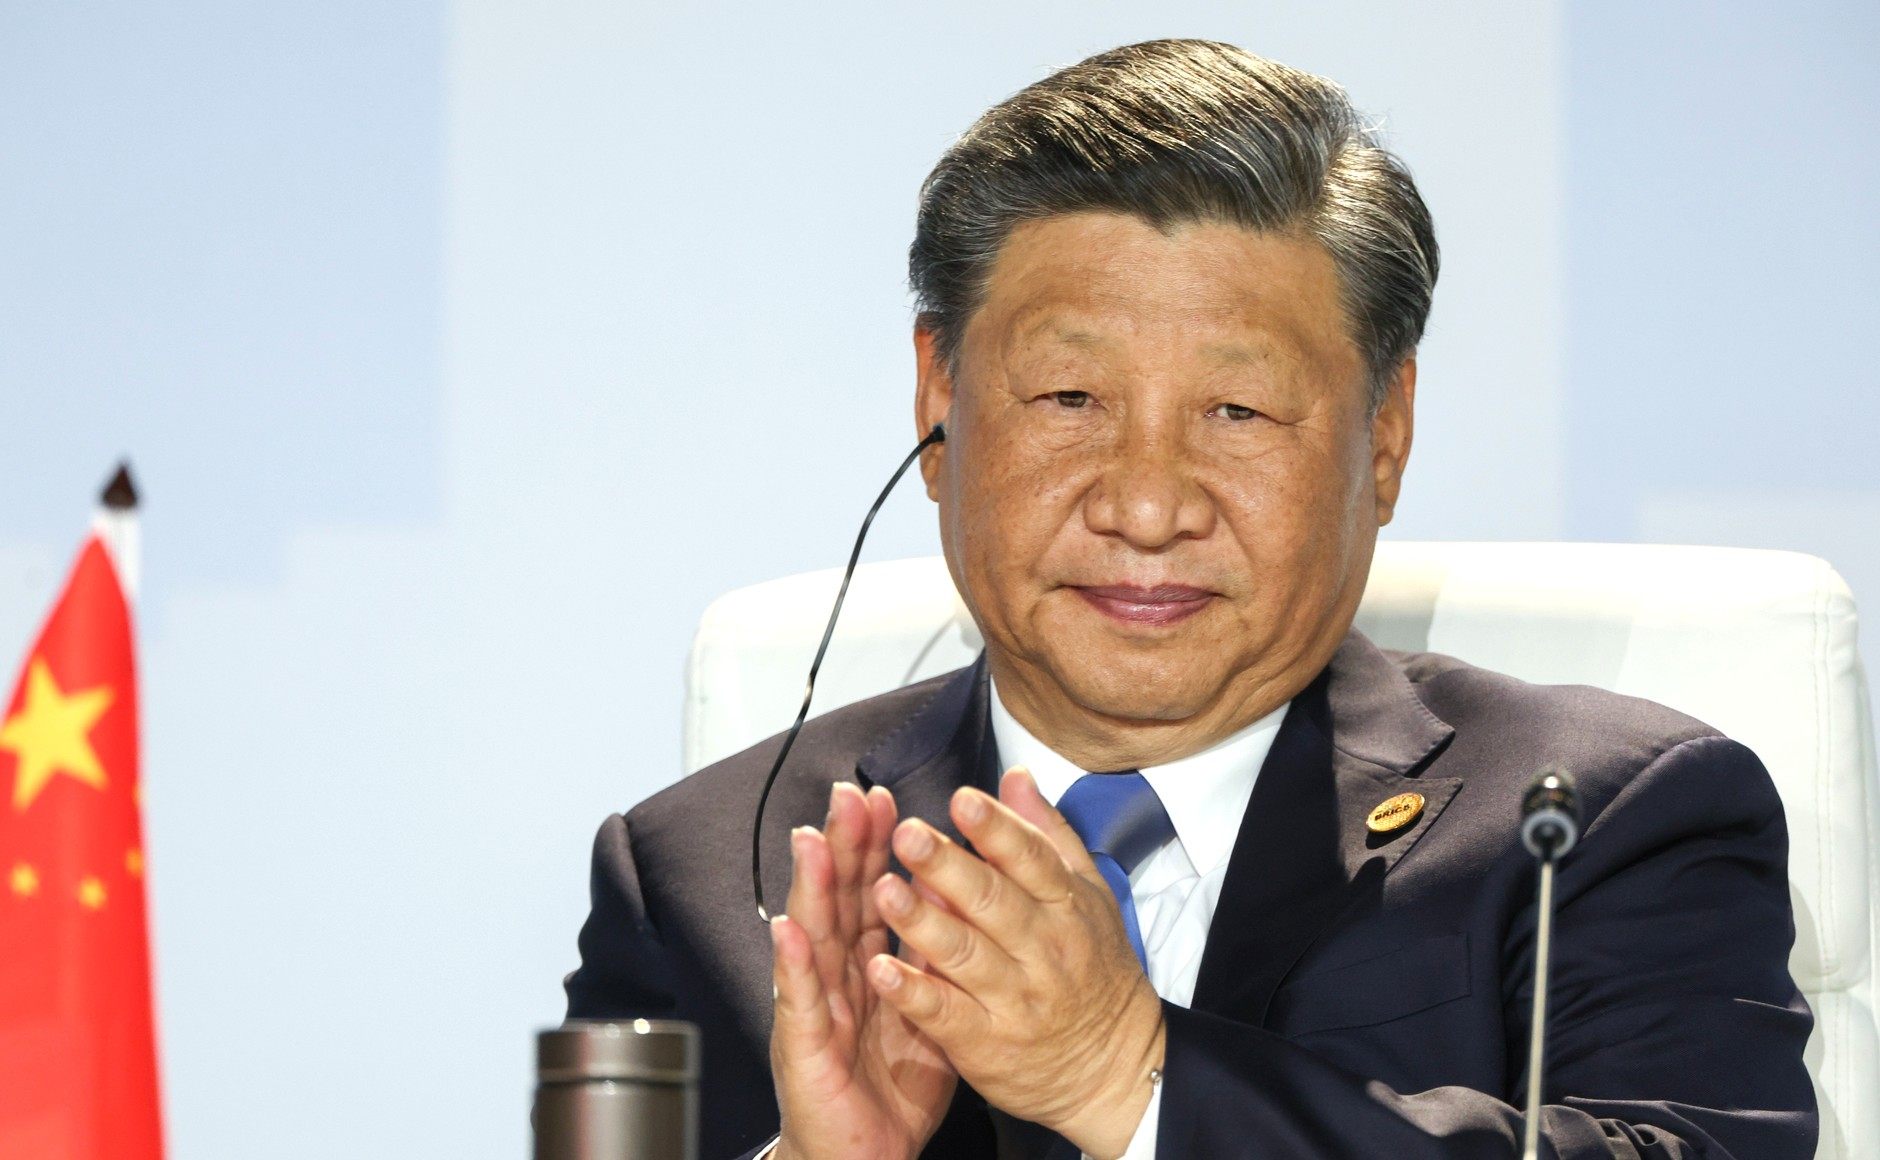 Chinese President Xi Jinping will not attend this weekend’s G20 in India, the foreign ministry has confirmed. Photo: dpa